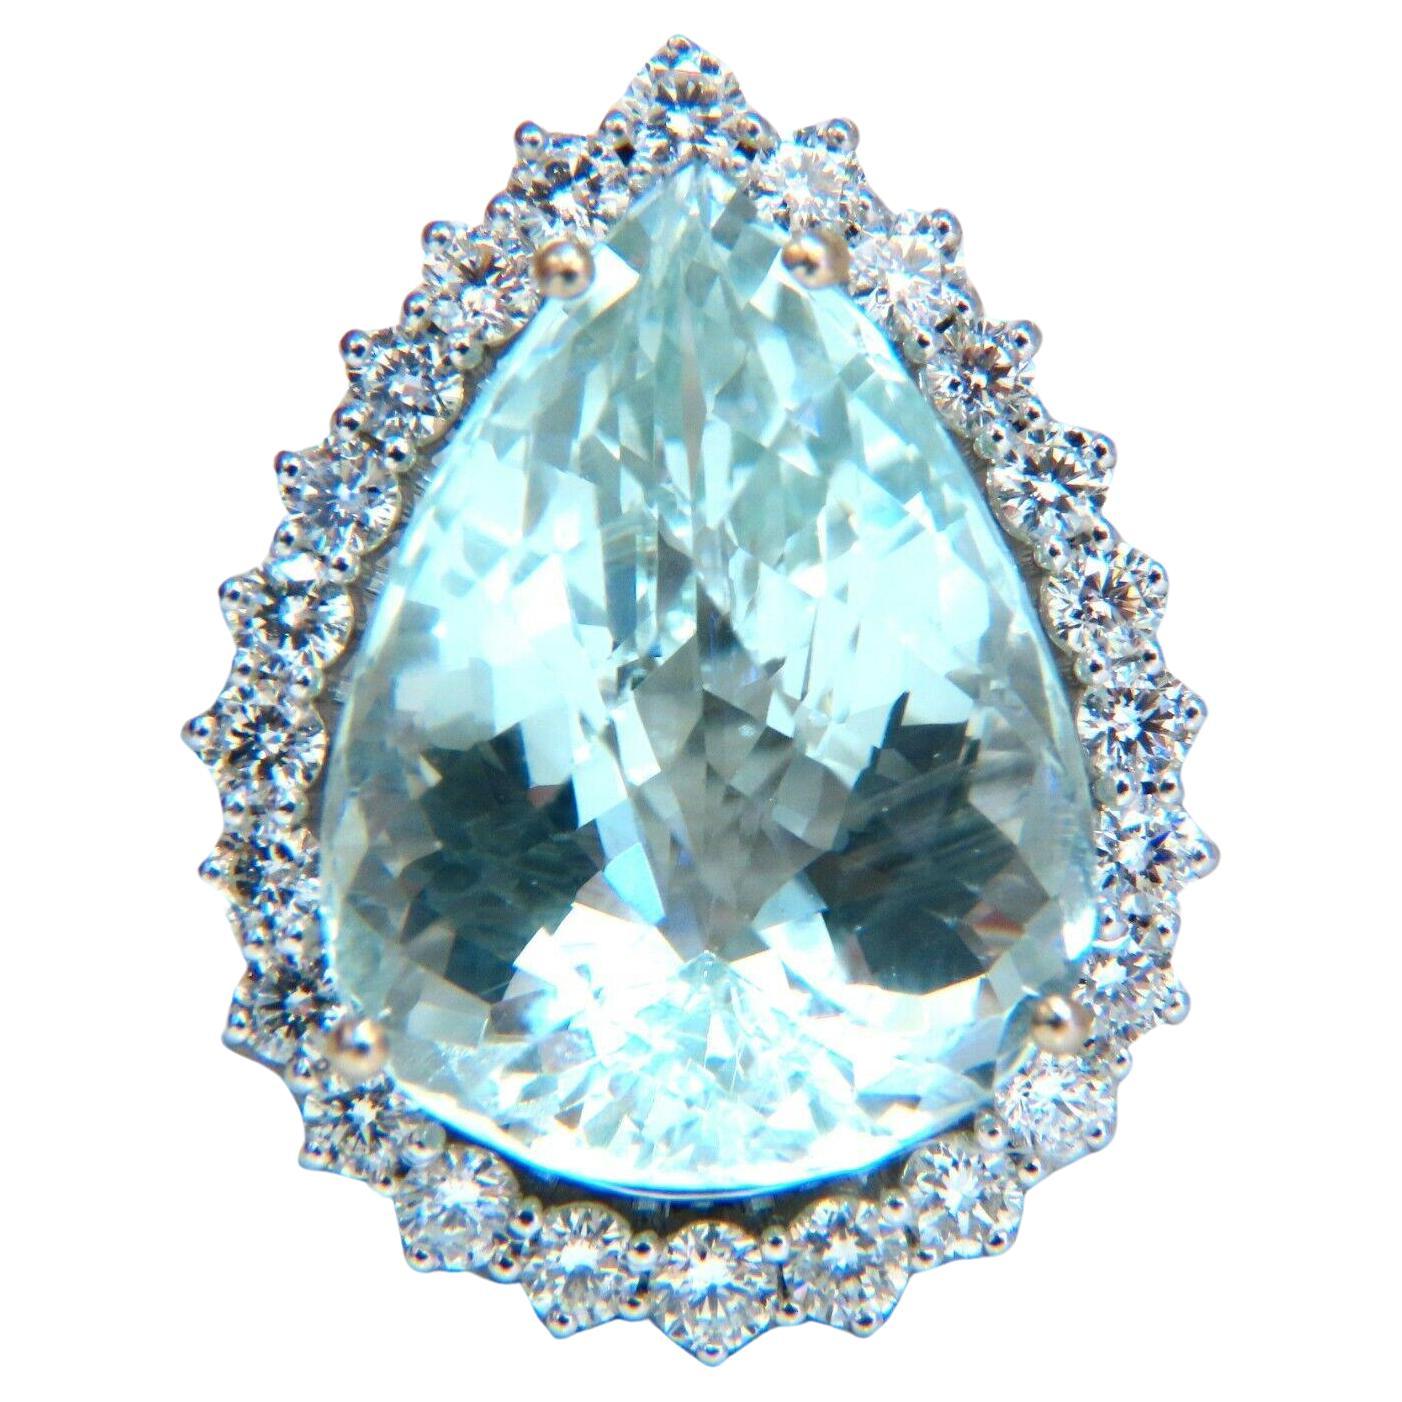 GIA Certified 29.31ct Natural Pear Shaped Aquamarine Diamonds Ring 14kt 12399 For Sale